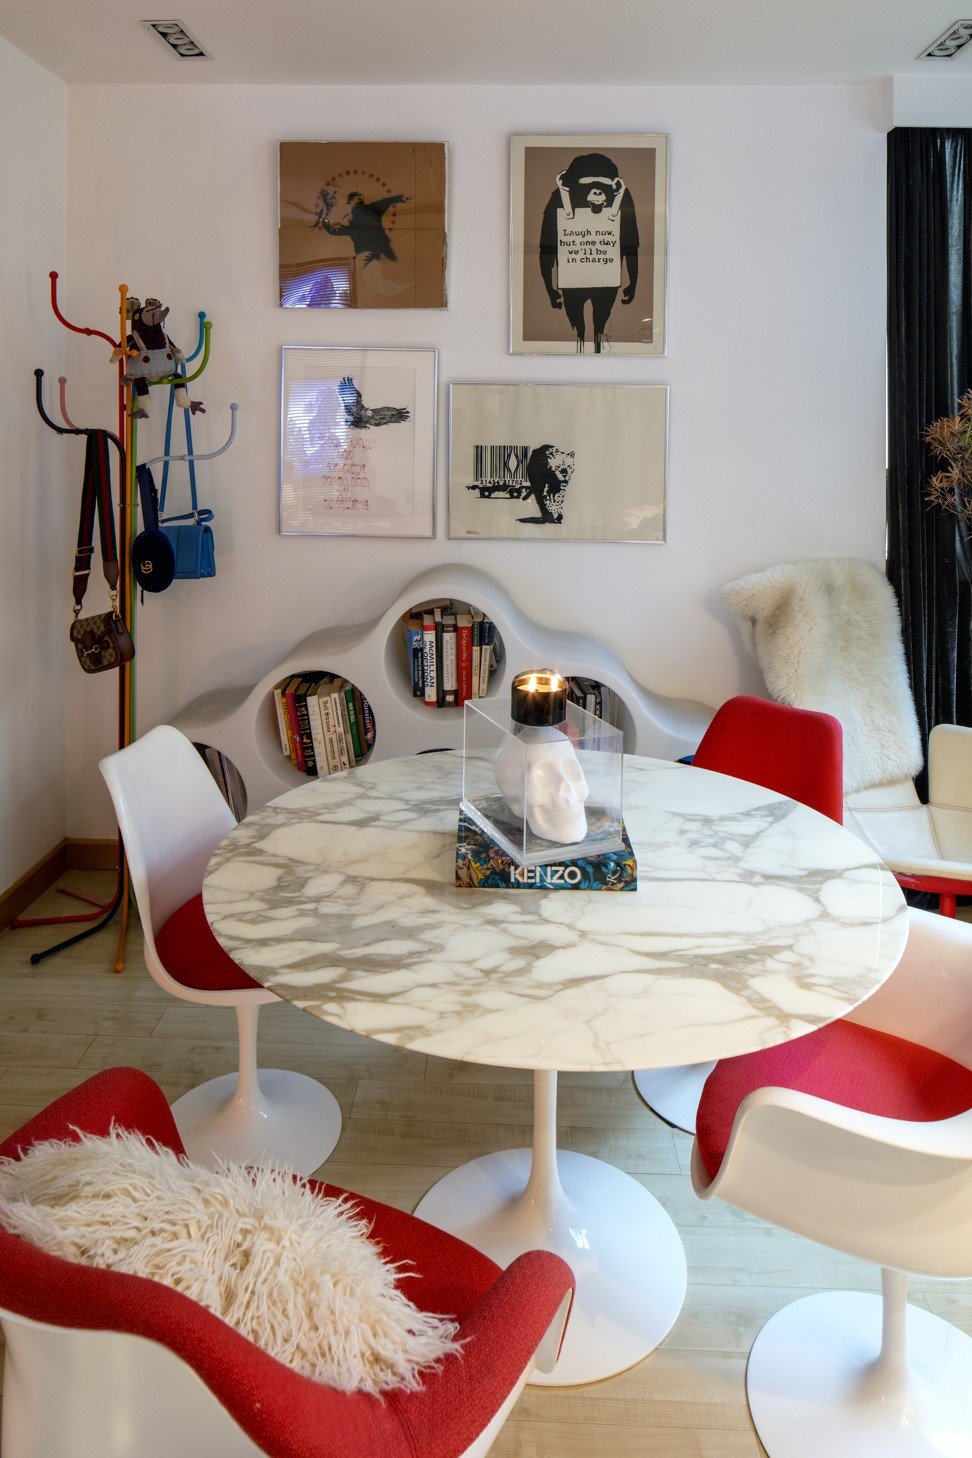 A splash of red gives the dining area a lift.